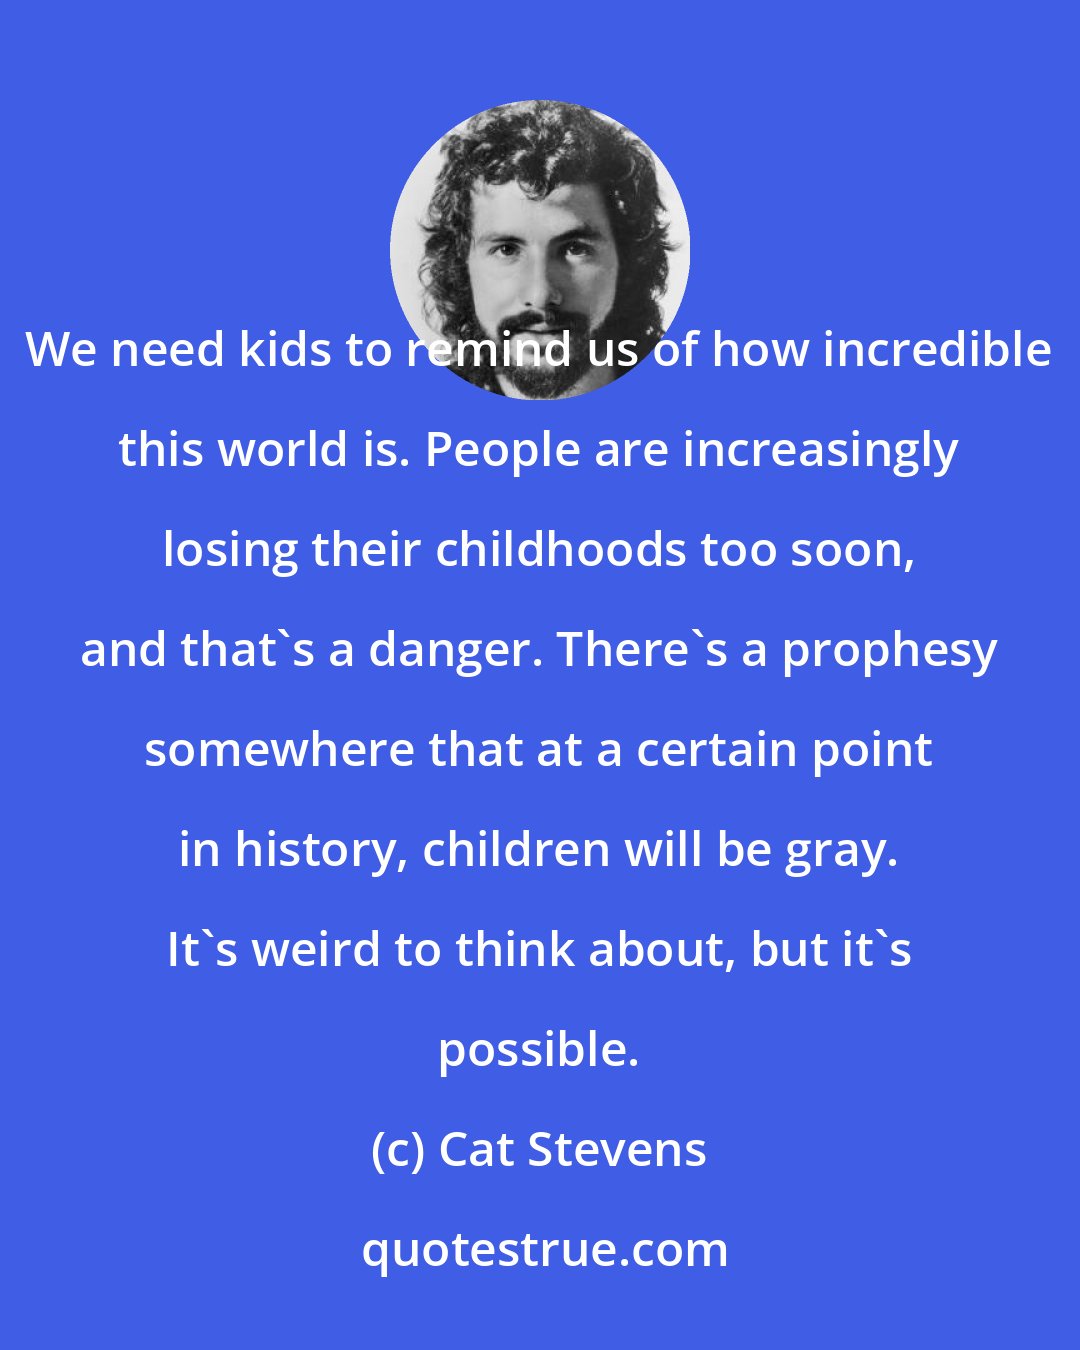 Cat Stevens: We need kids to remind us of how incredible this world is. People are increasingly losing their childhoods too soon, and that's a danger. There's a prophesy somewhere that at a certain point in history, children will be gray. It's weird to think about, but it's possible.